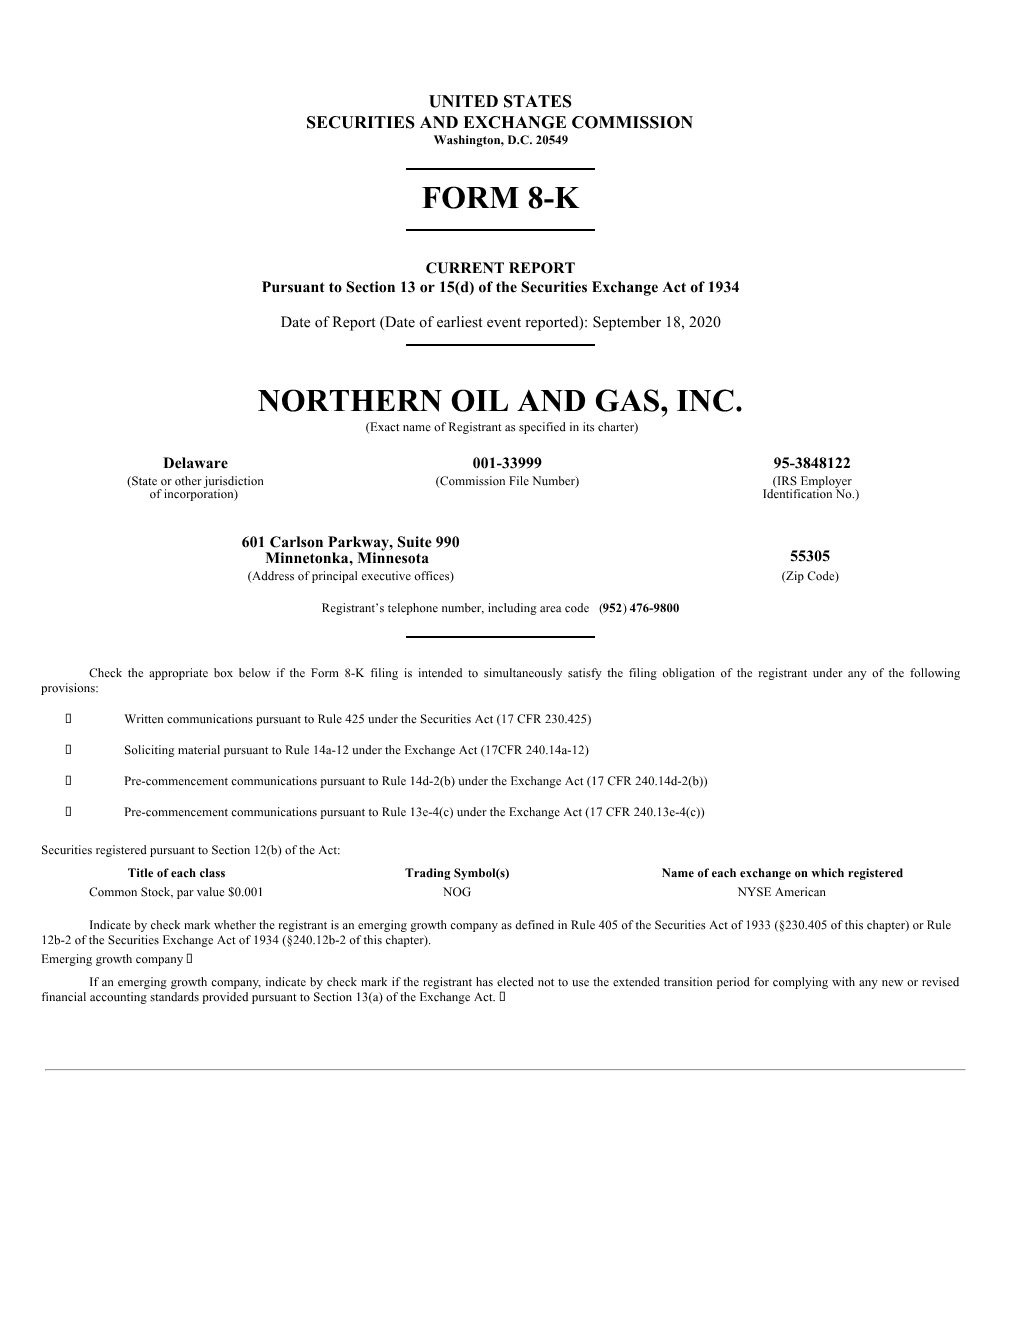 Form 8-K Northern Oil and Gas, Inc